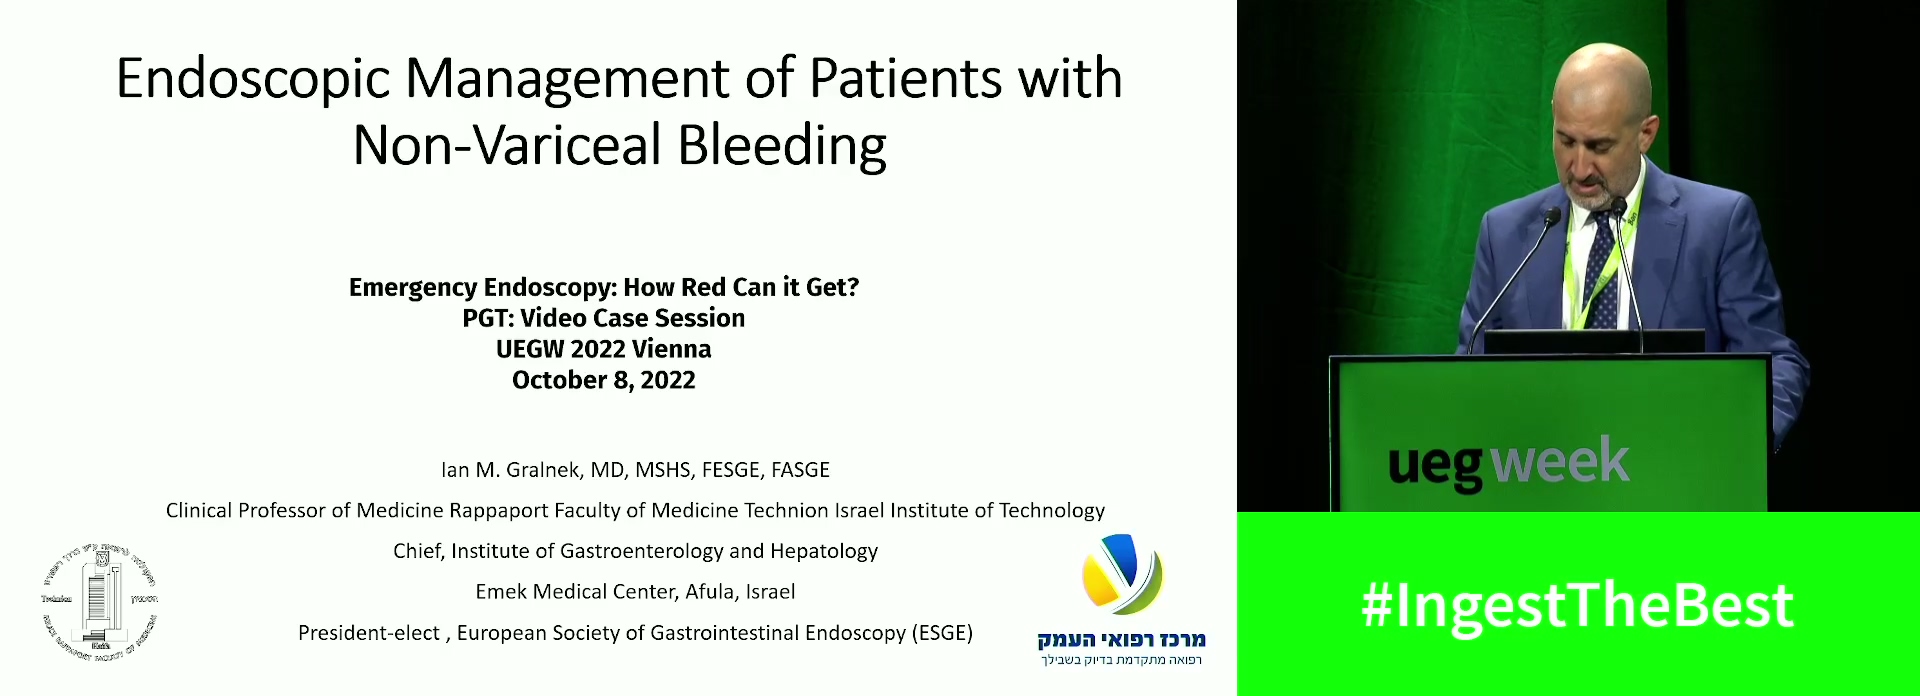 Endoscopic management of patients with non-variceal bleeding